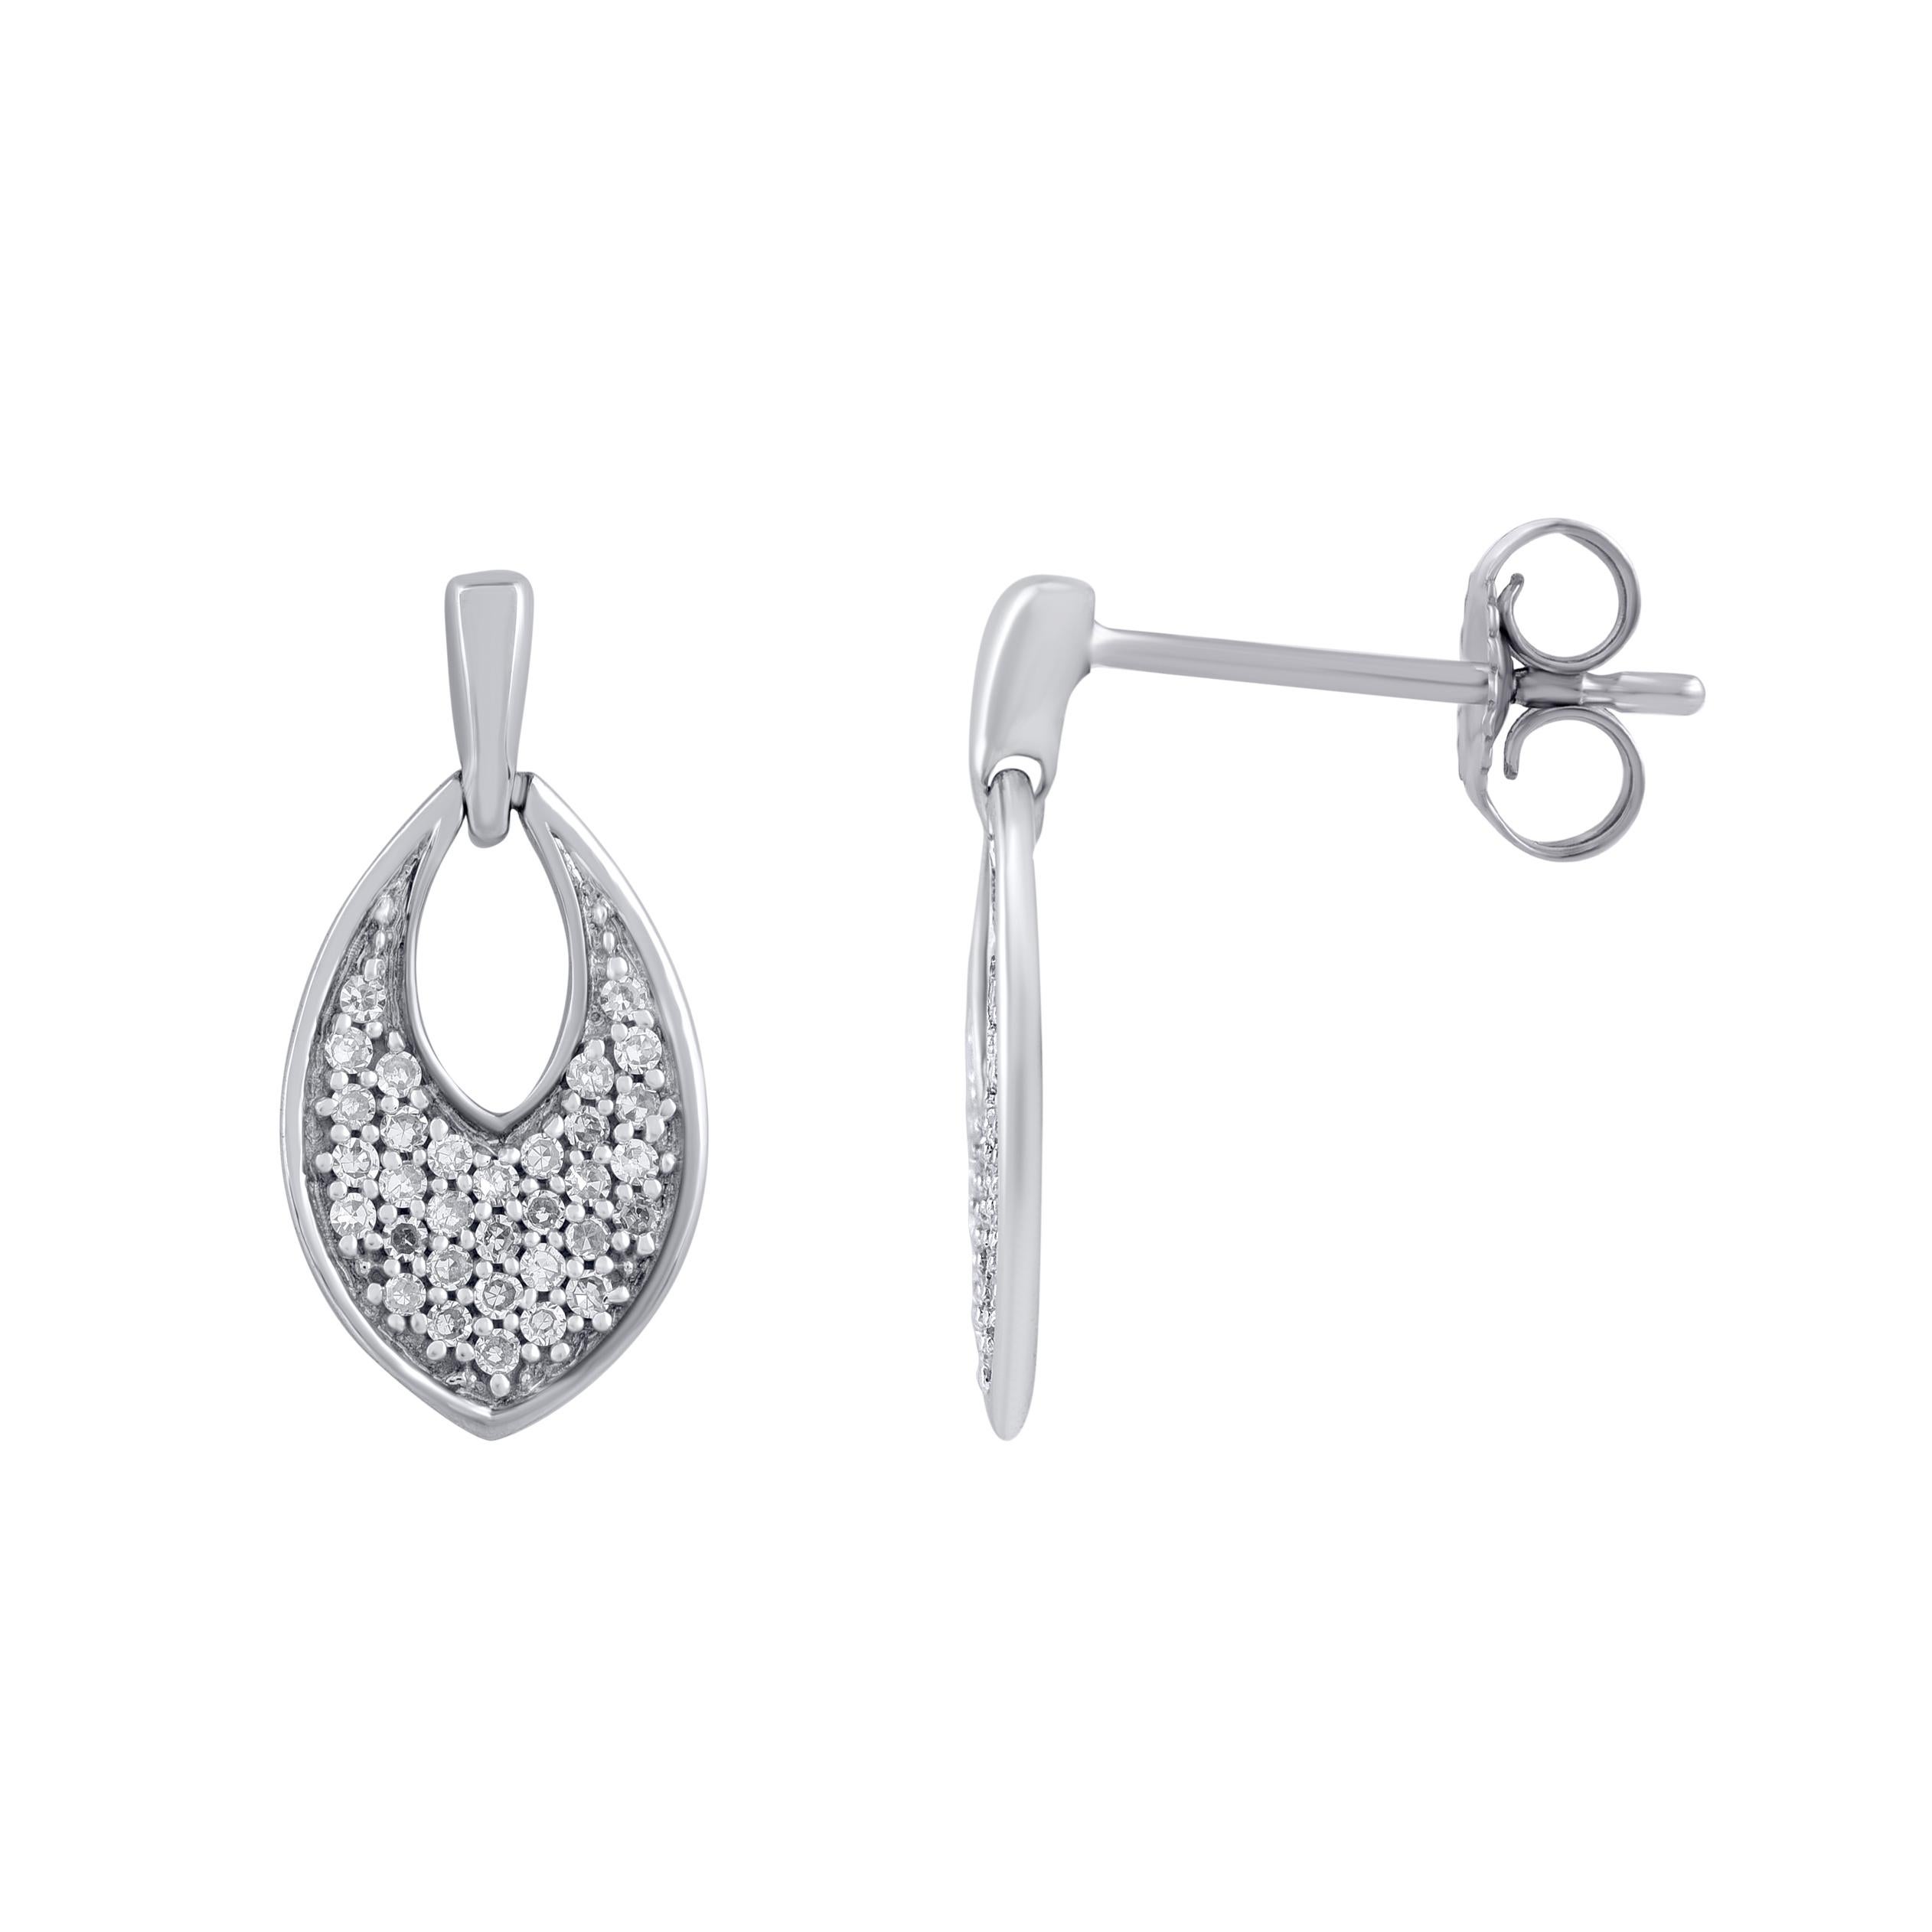 Elevate your look with these stunning diamond drop earrings. This drop earring is crafted from 14-karat white gold and features 64 single cut diamonds set in prong setting. H-I color I2 clarity and a high polish finish complete the Brilliant